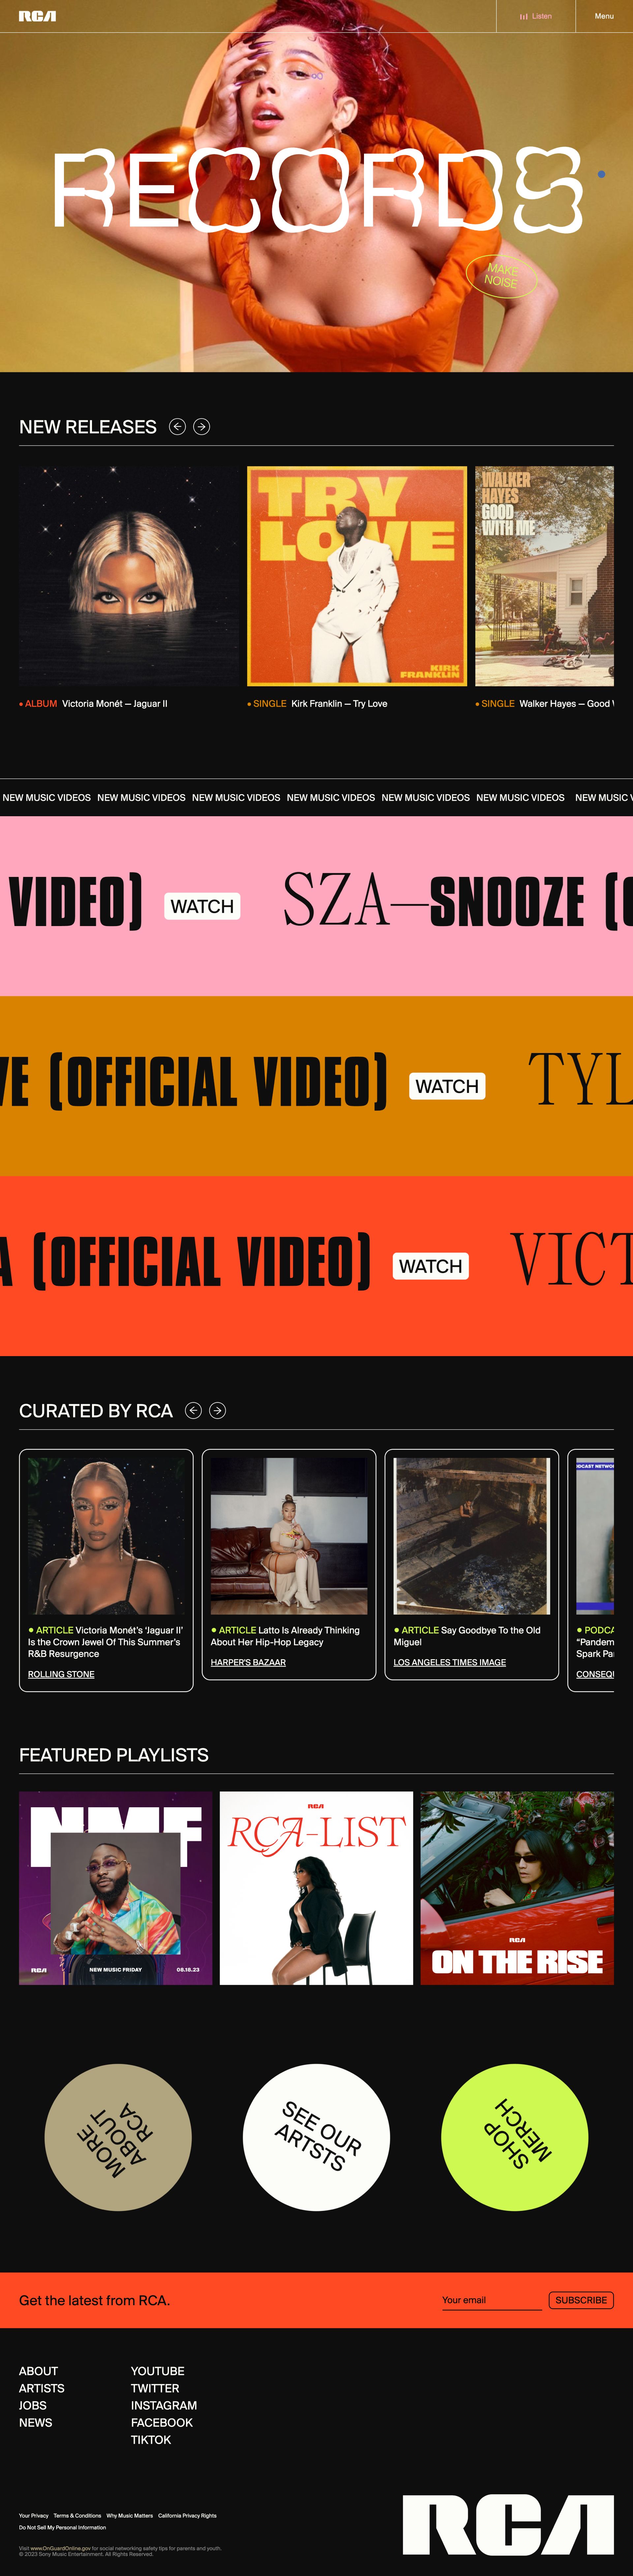 RCA Records homepage built in WordPress